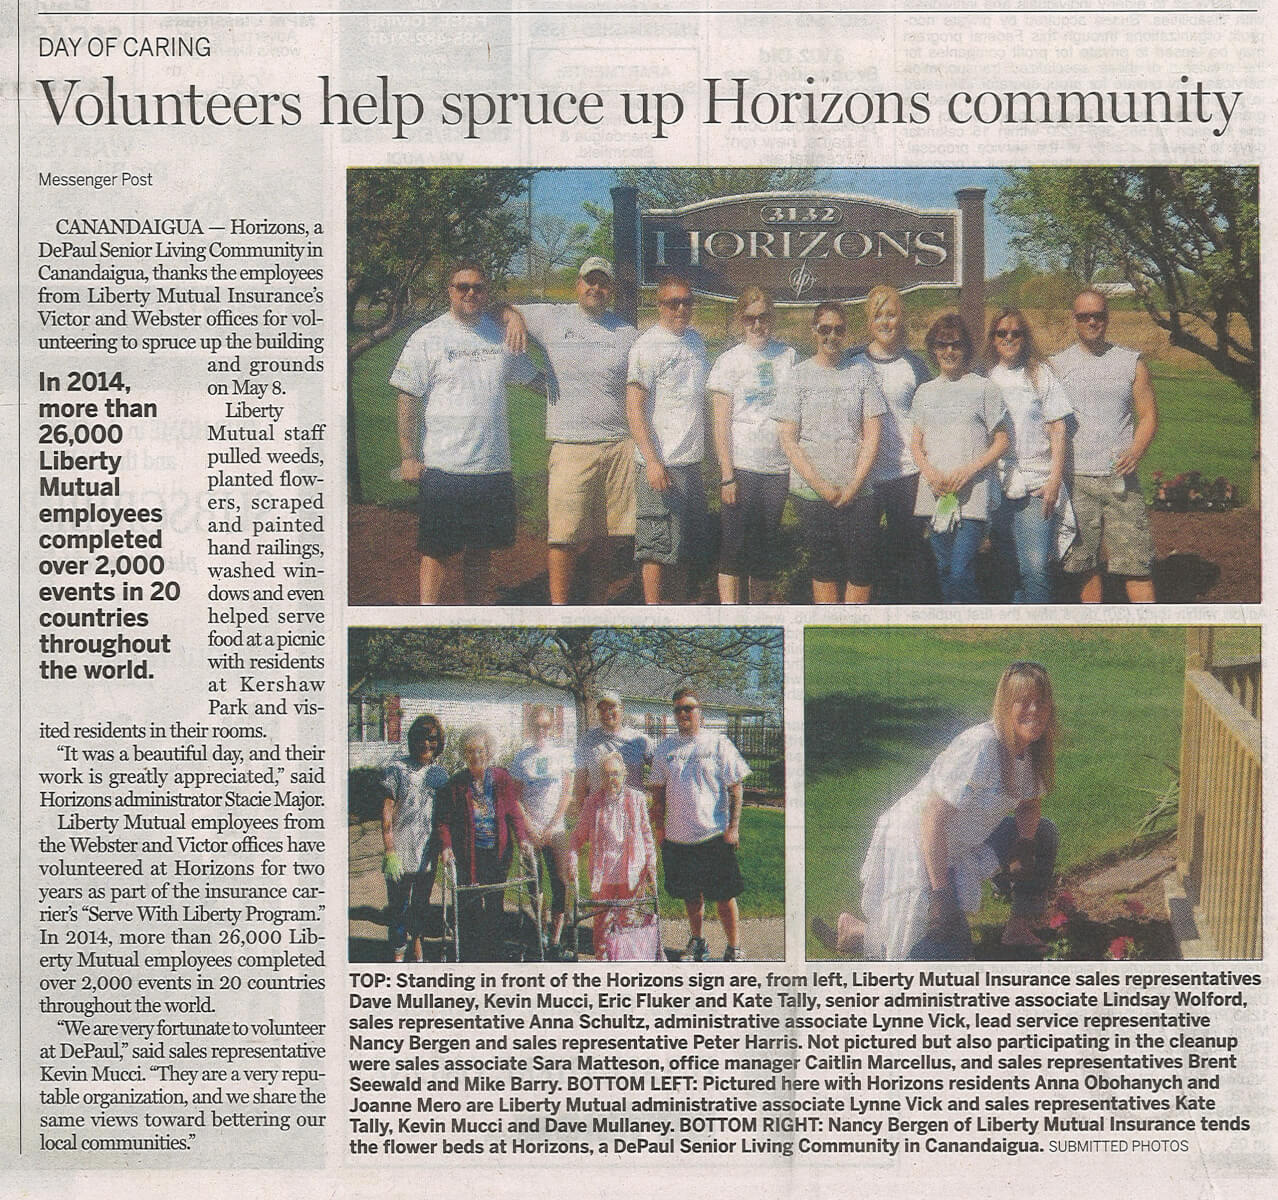 Horizons Day of Caring article and photos in the Daily Messenger May 27, 2015